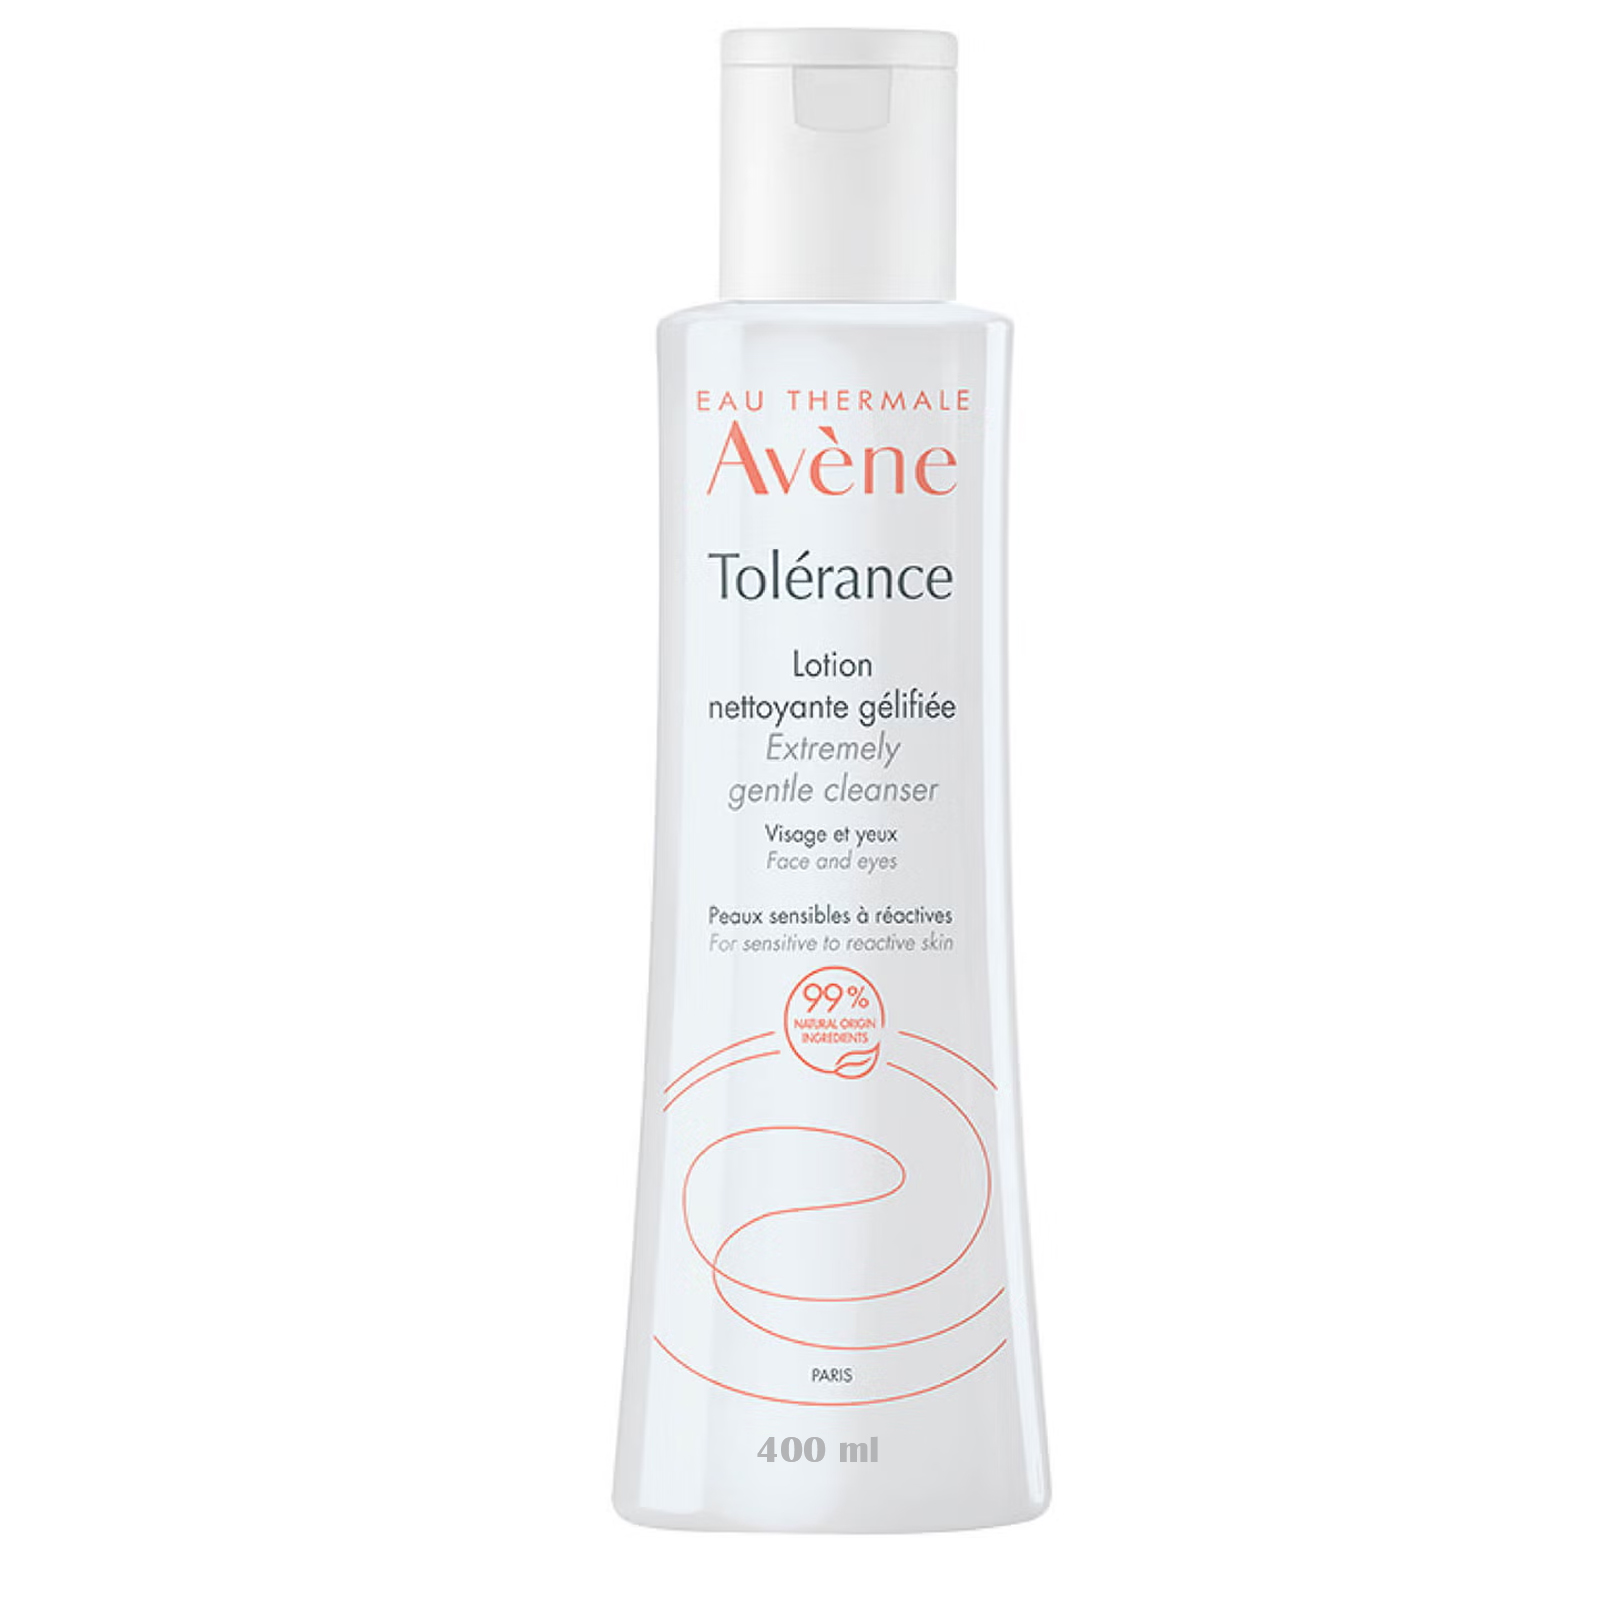 CLEANSING LOTION EXTREMY GENTLE TOLERANCE FOR SENSITIVE TO REACTIVE SKIN AVENE ( 400 ML )